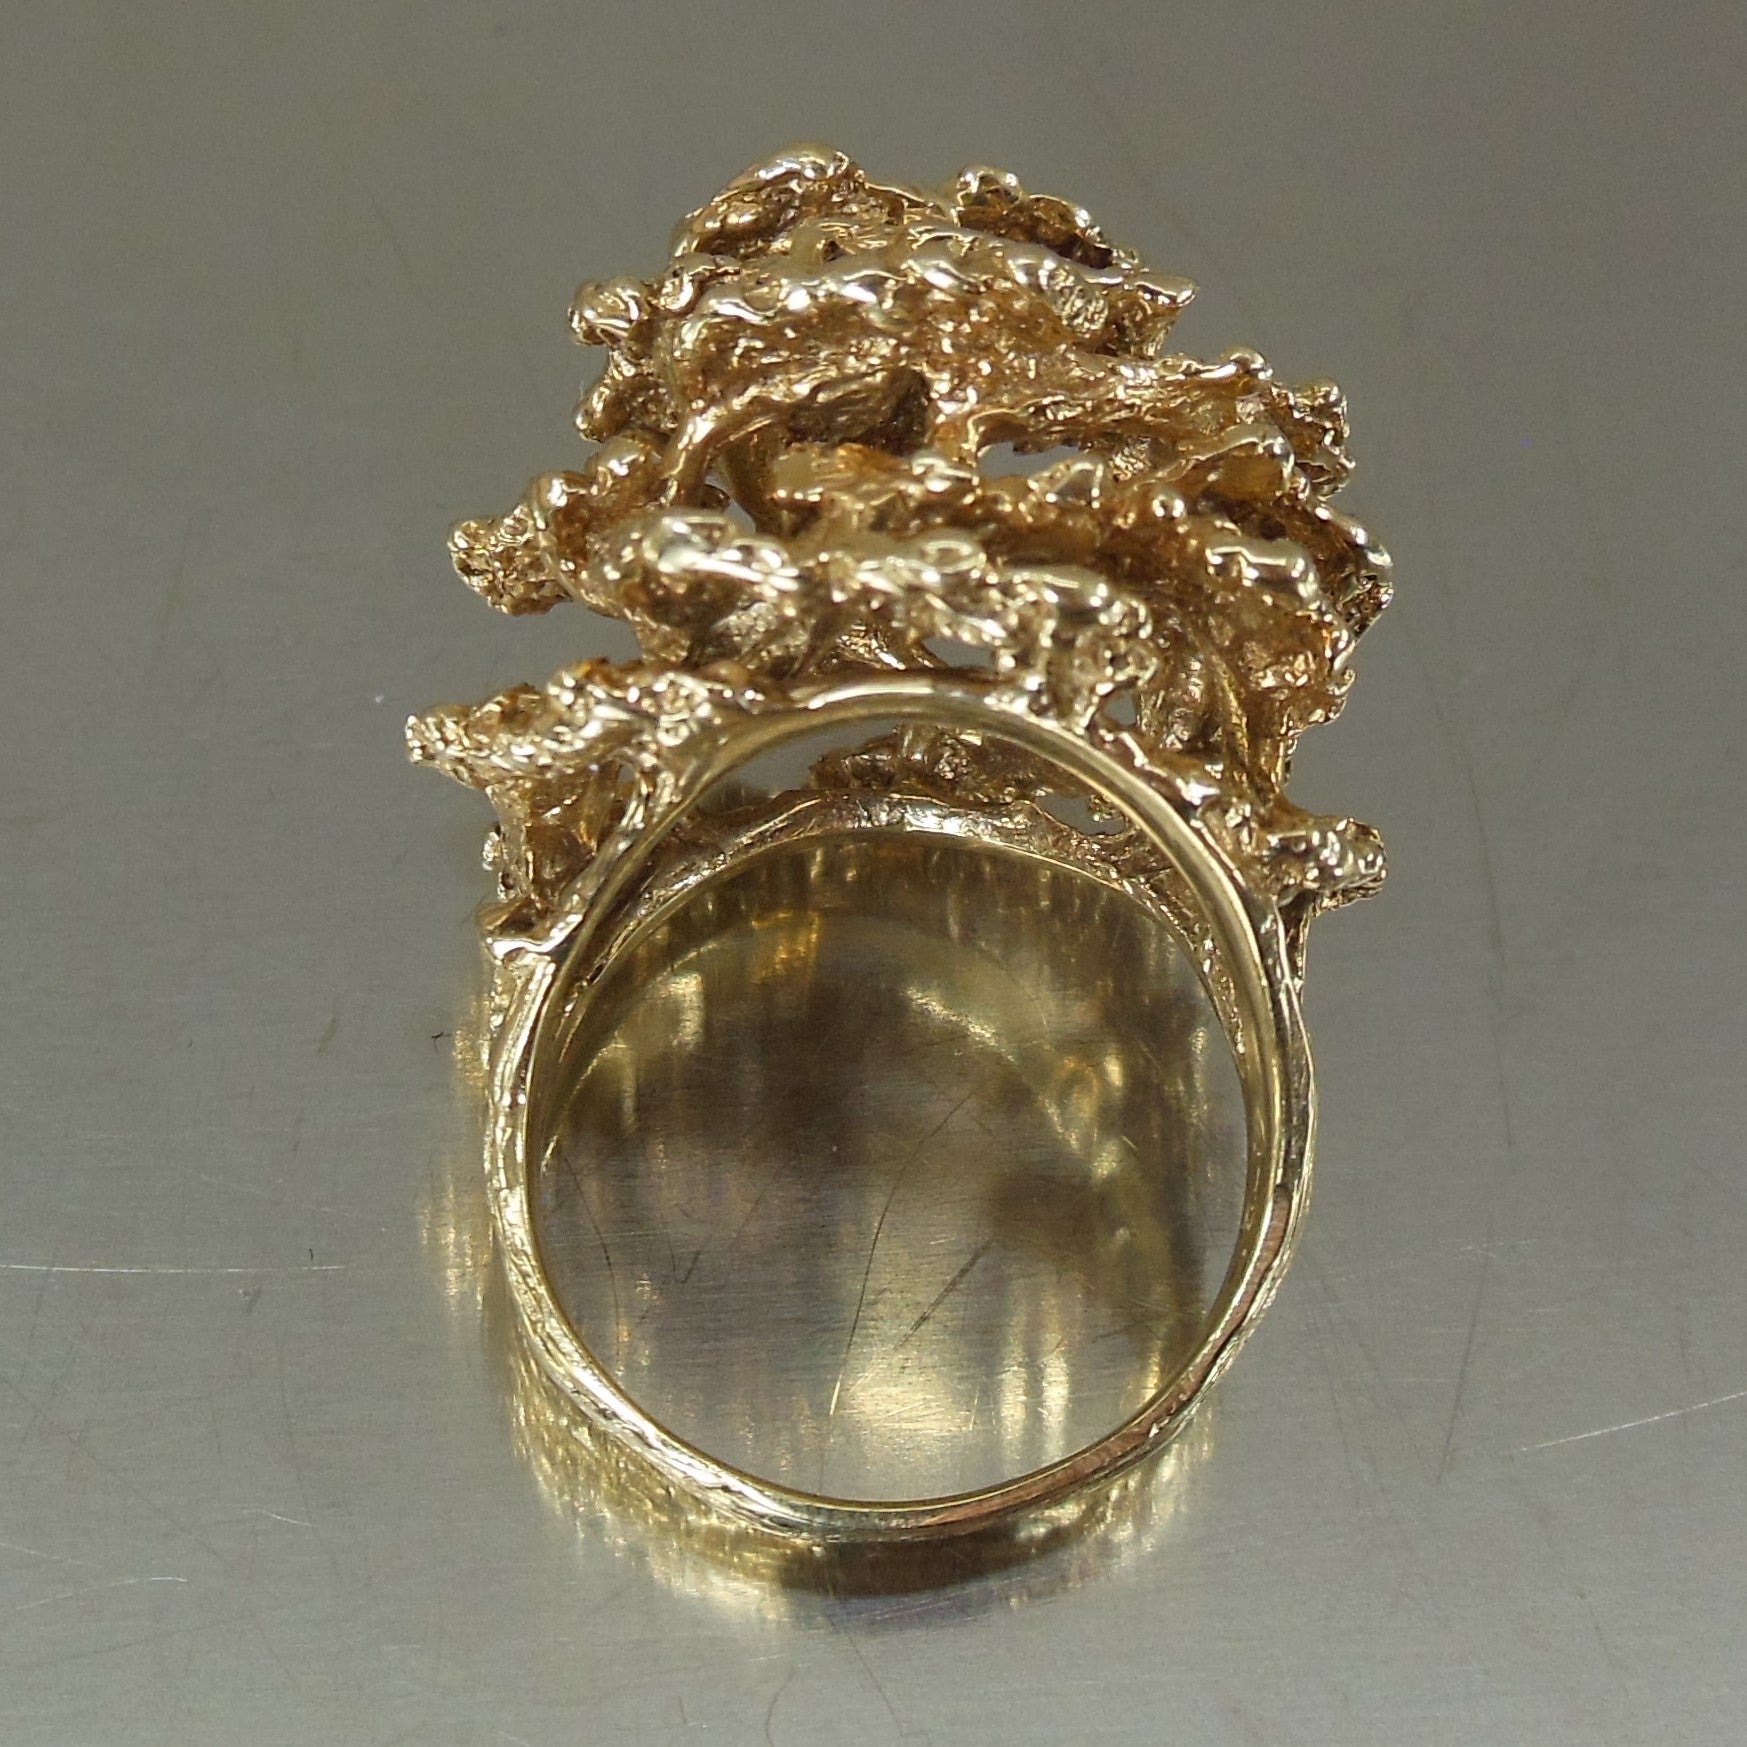 Cocktail Ring 14K Yellow Gold Big Brutalist Chunky Raised Layers Size 9 used